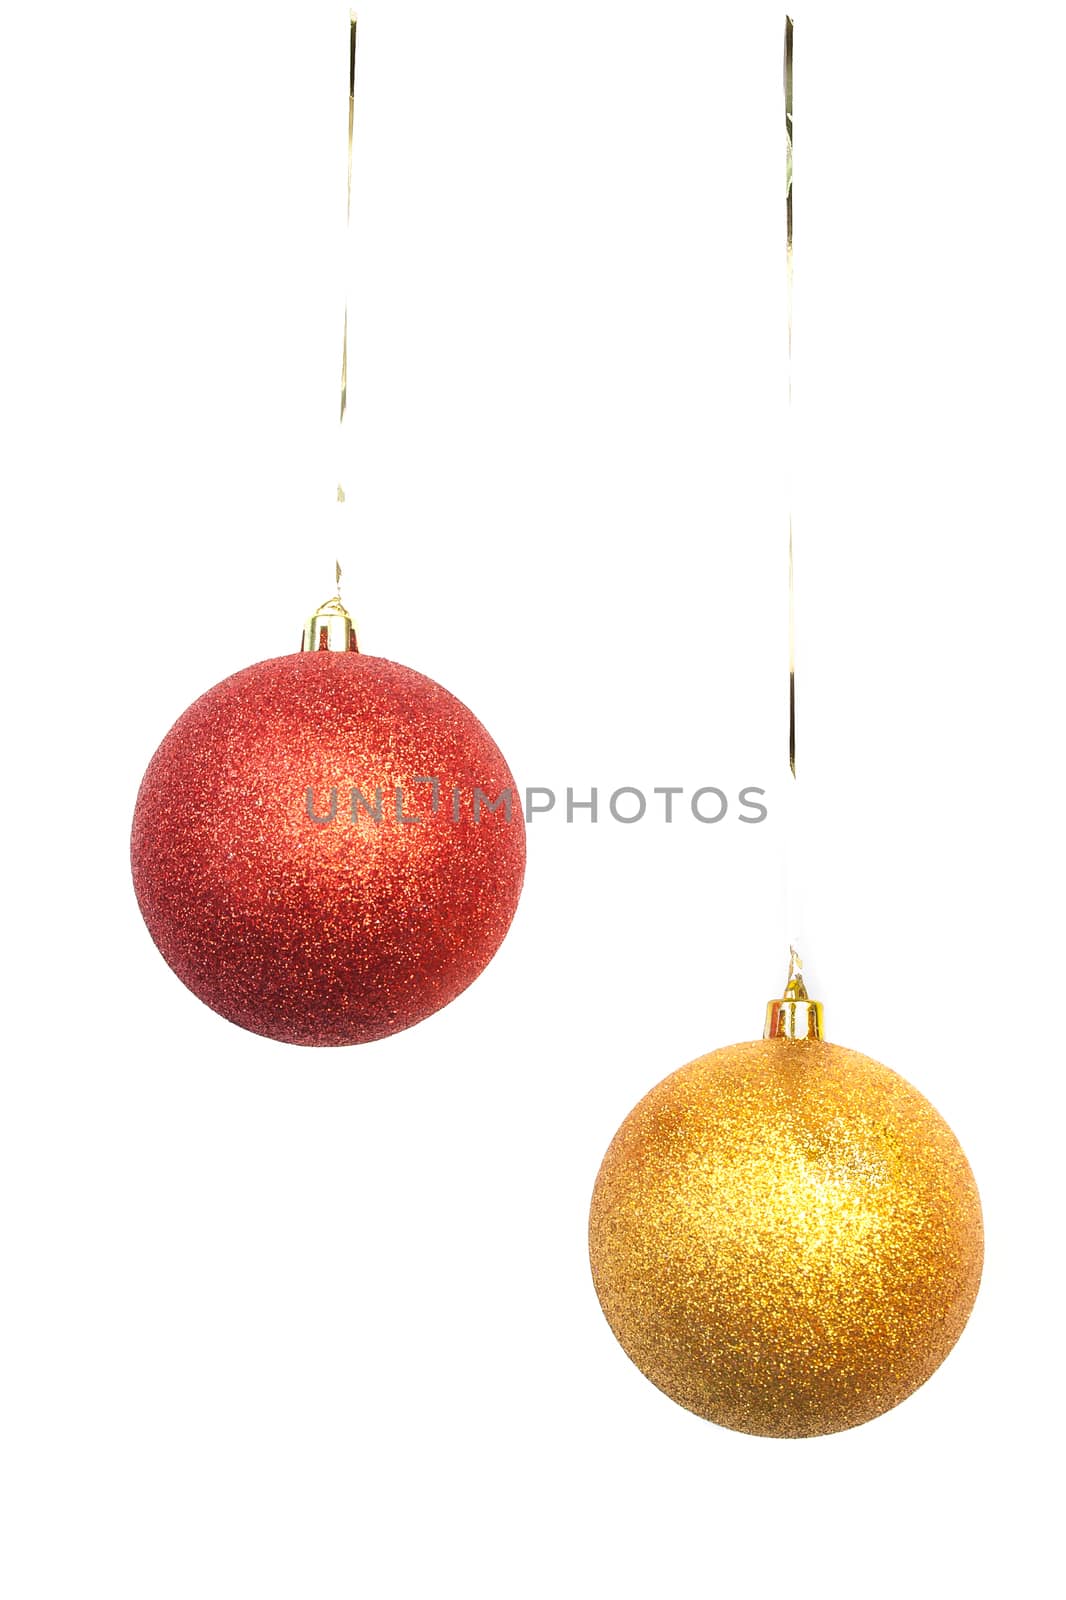 gold and red Christmas balls hanging on white background